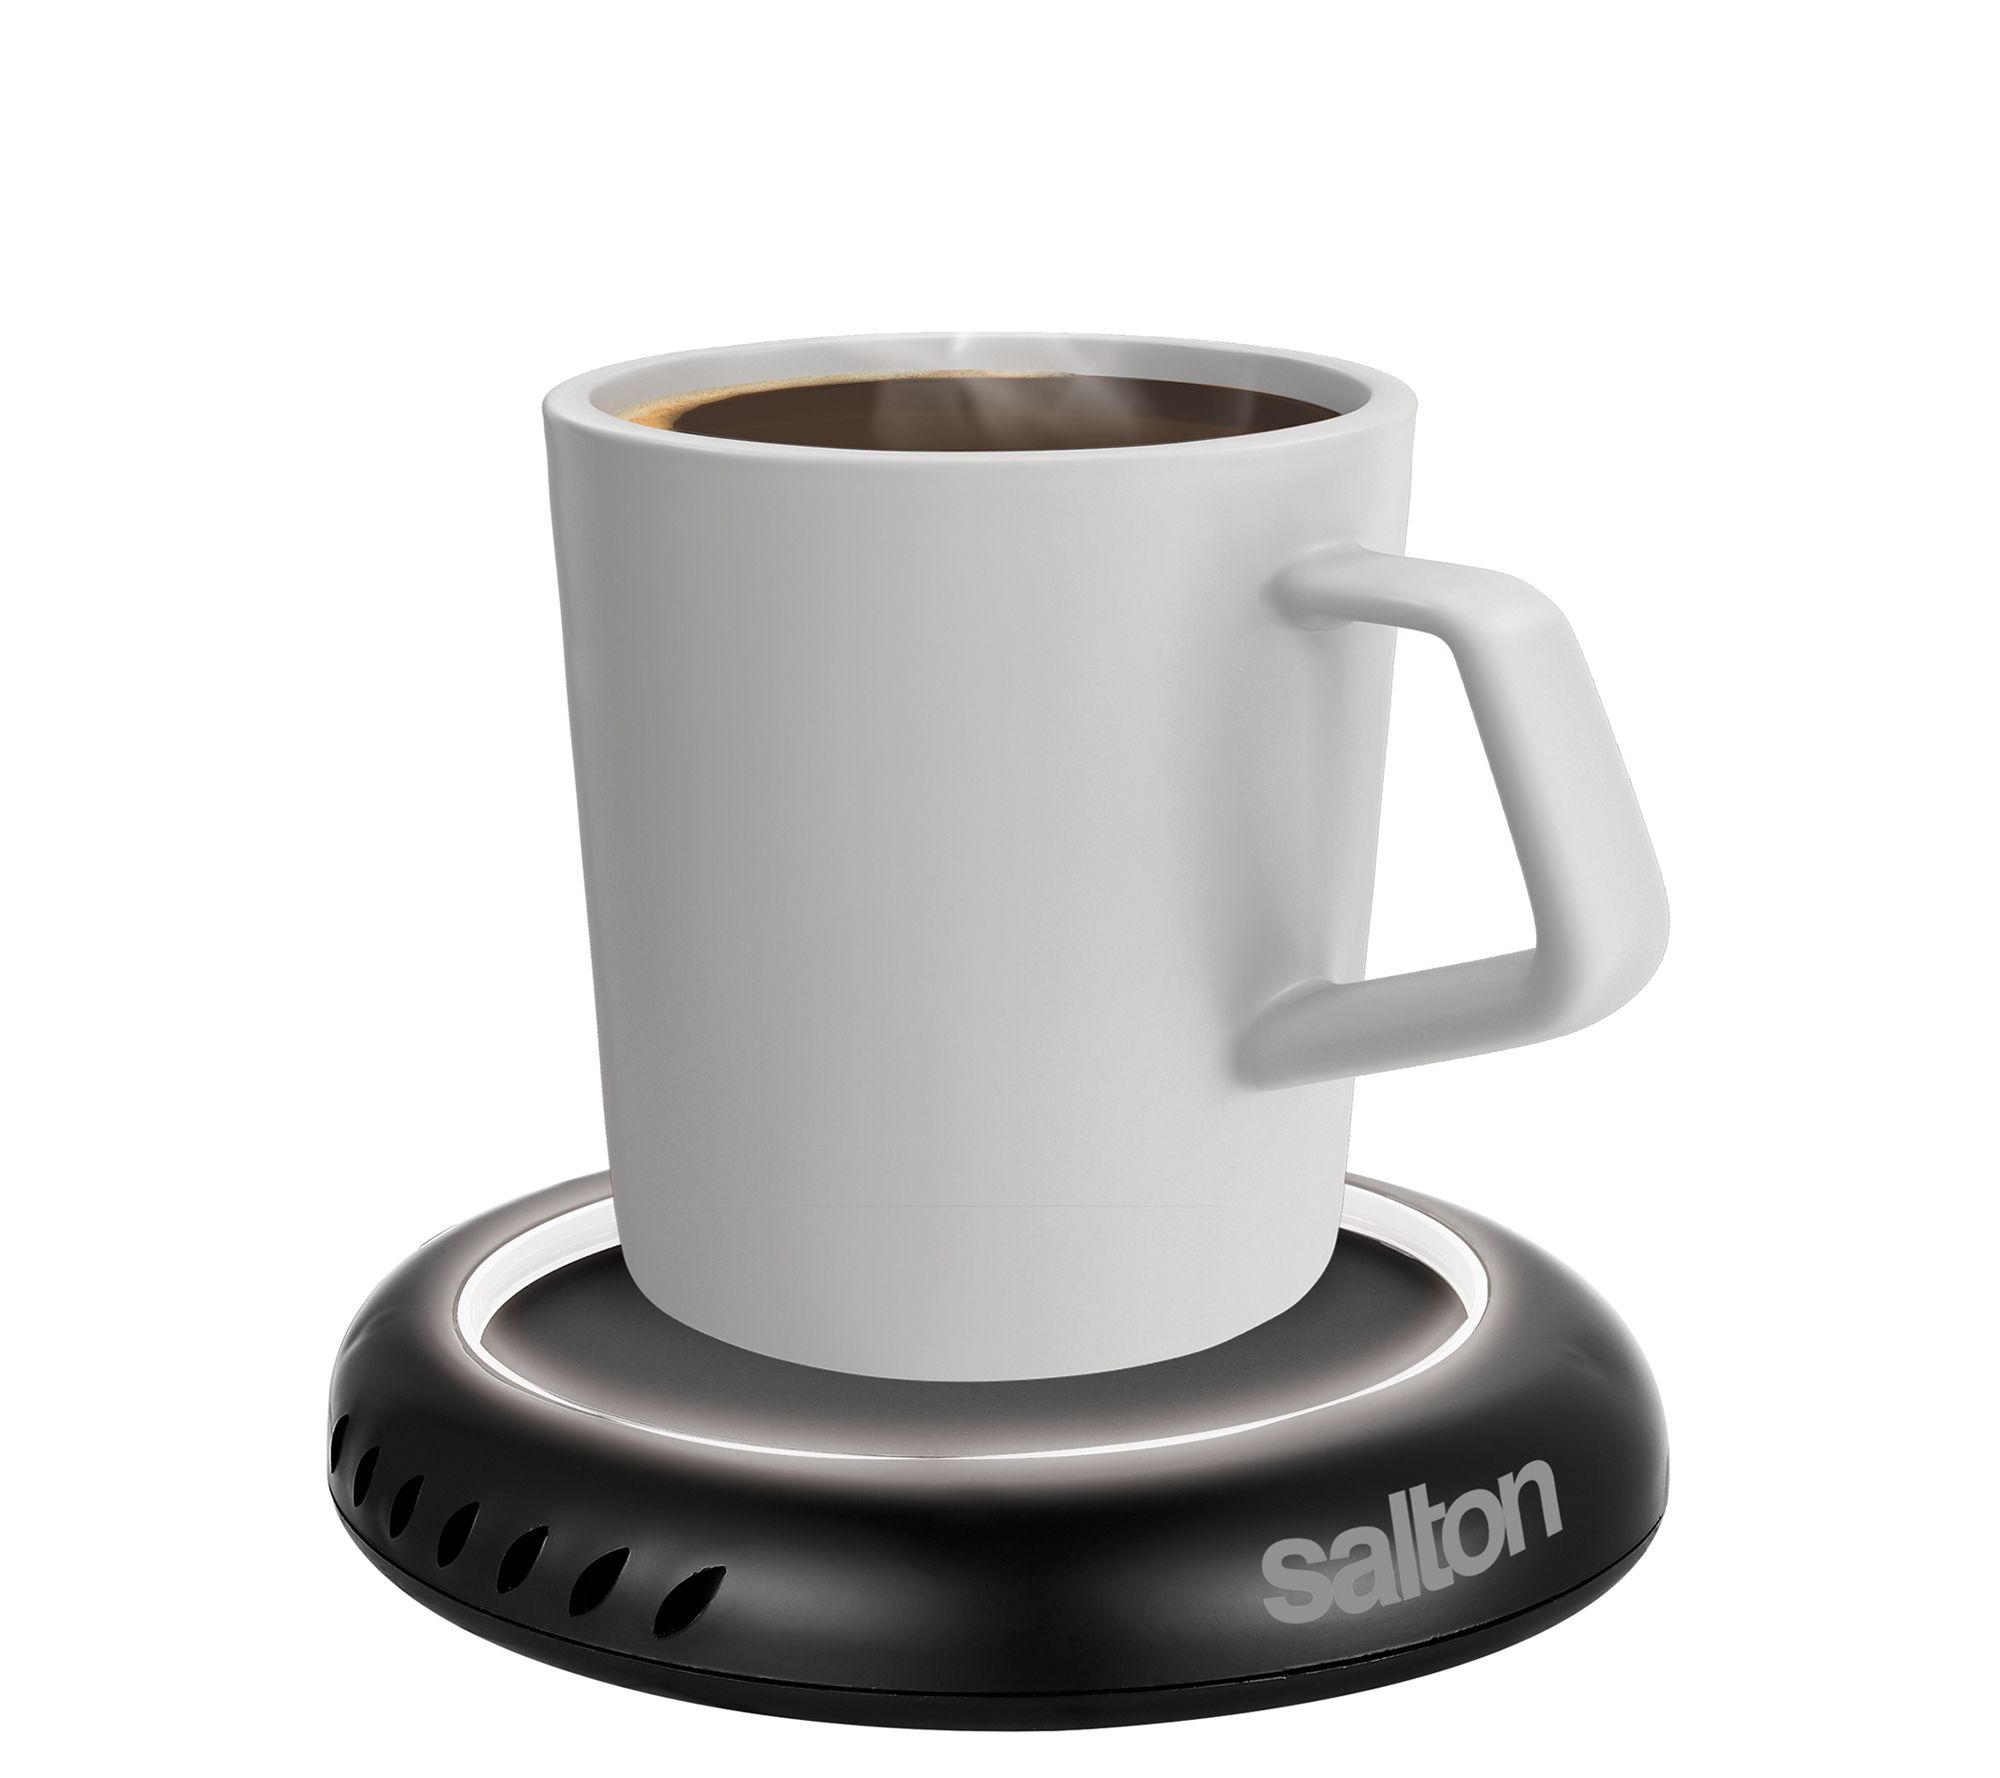 Electric Smart Mug Warmer Will Ensure That Your Beverage Is At The  Temperature You Want It To Be - Avail Offer Now